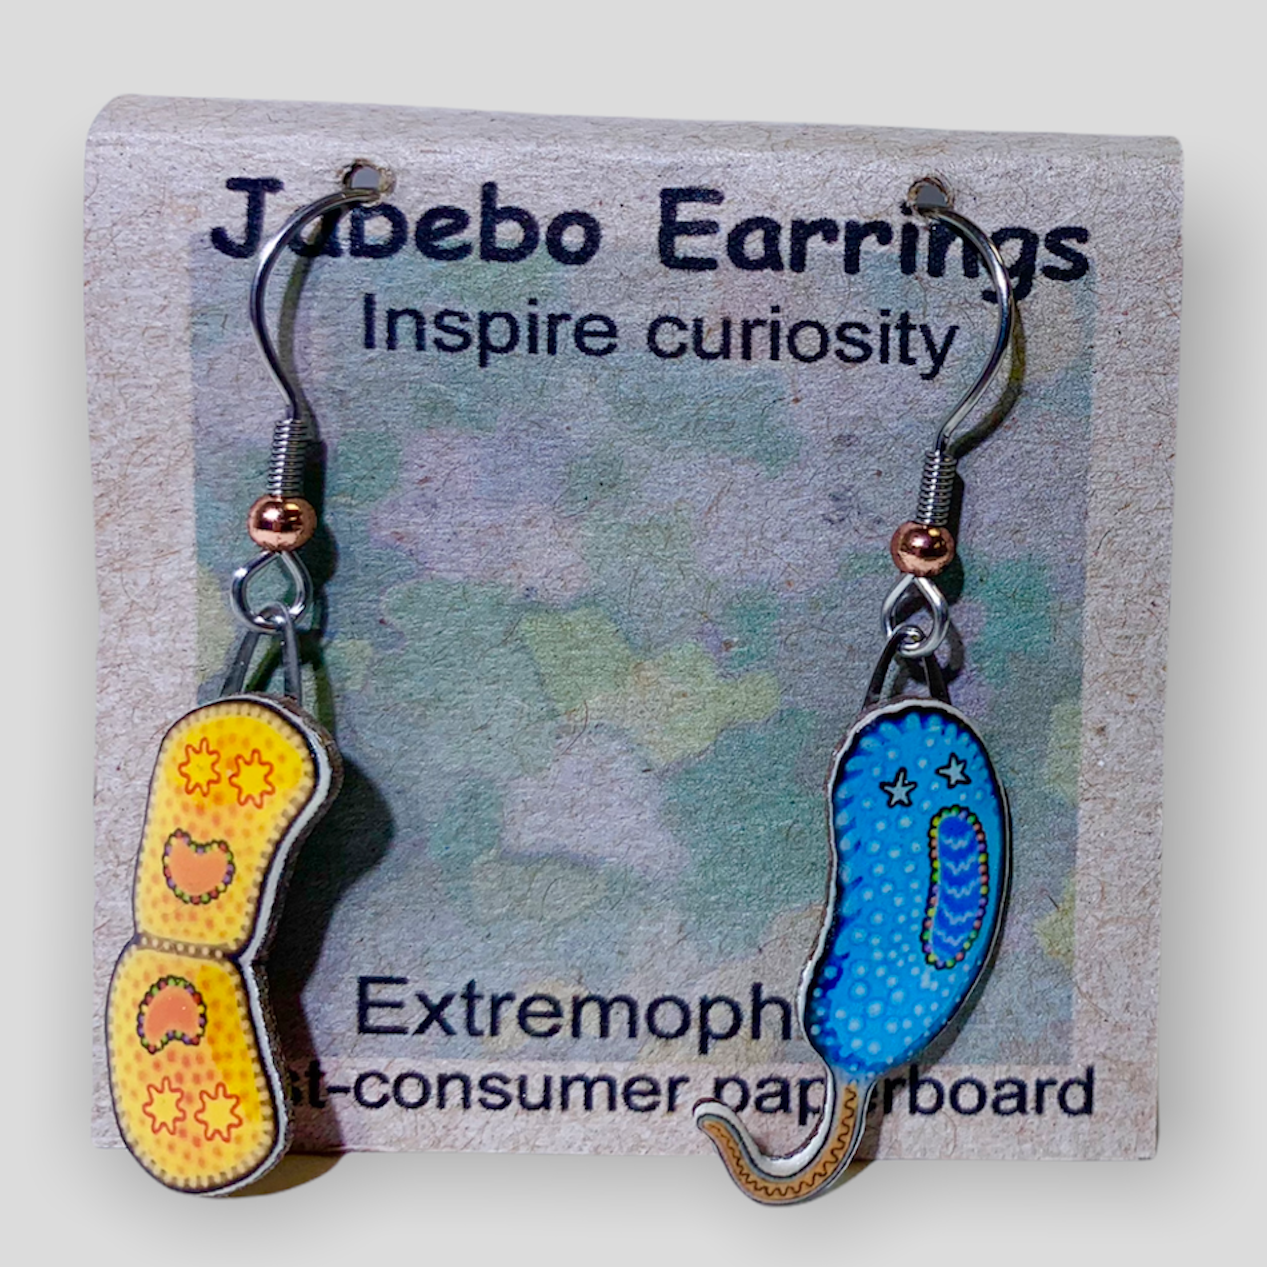 Picture shown is of 1 inch tall pair of earrings of Extremophiles.